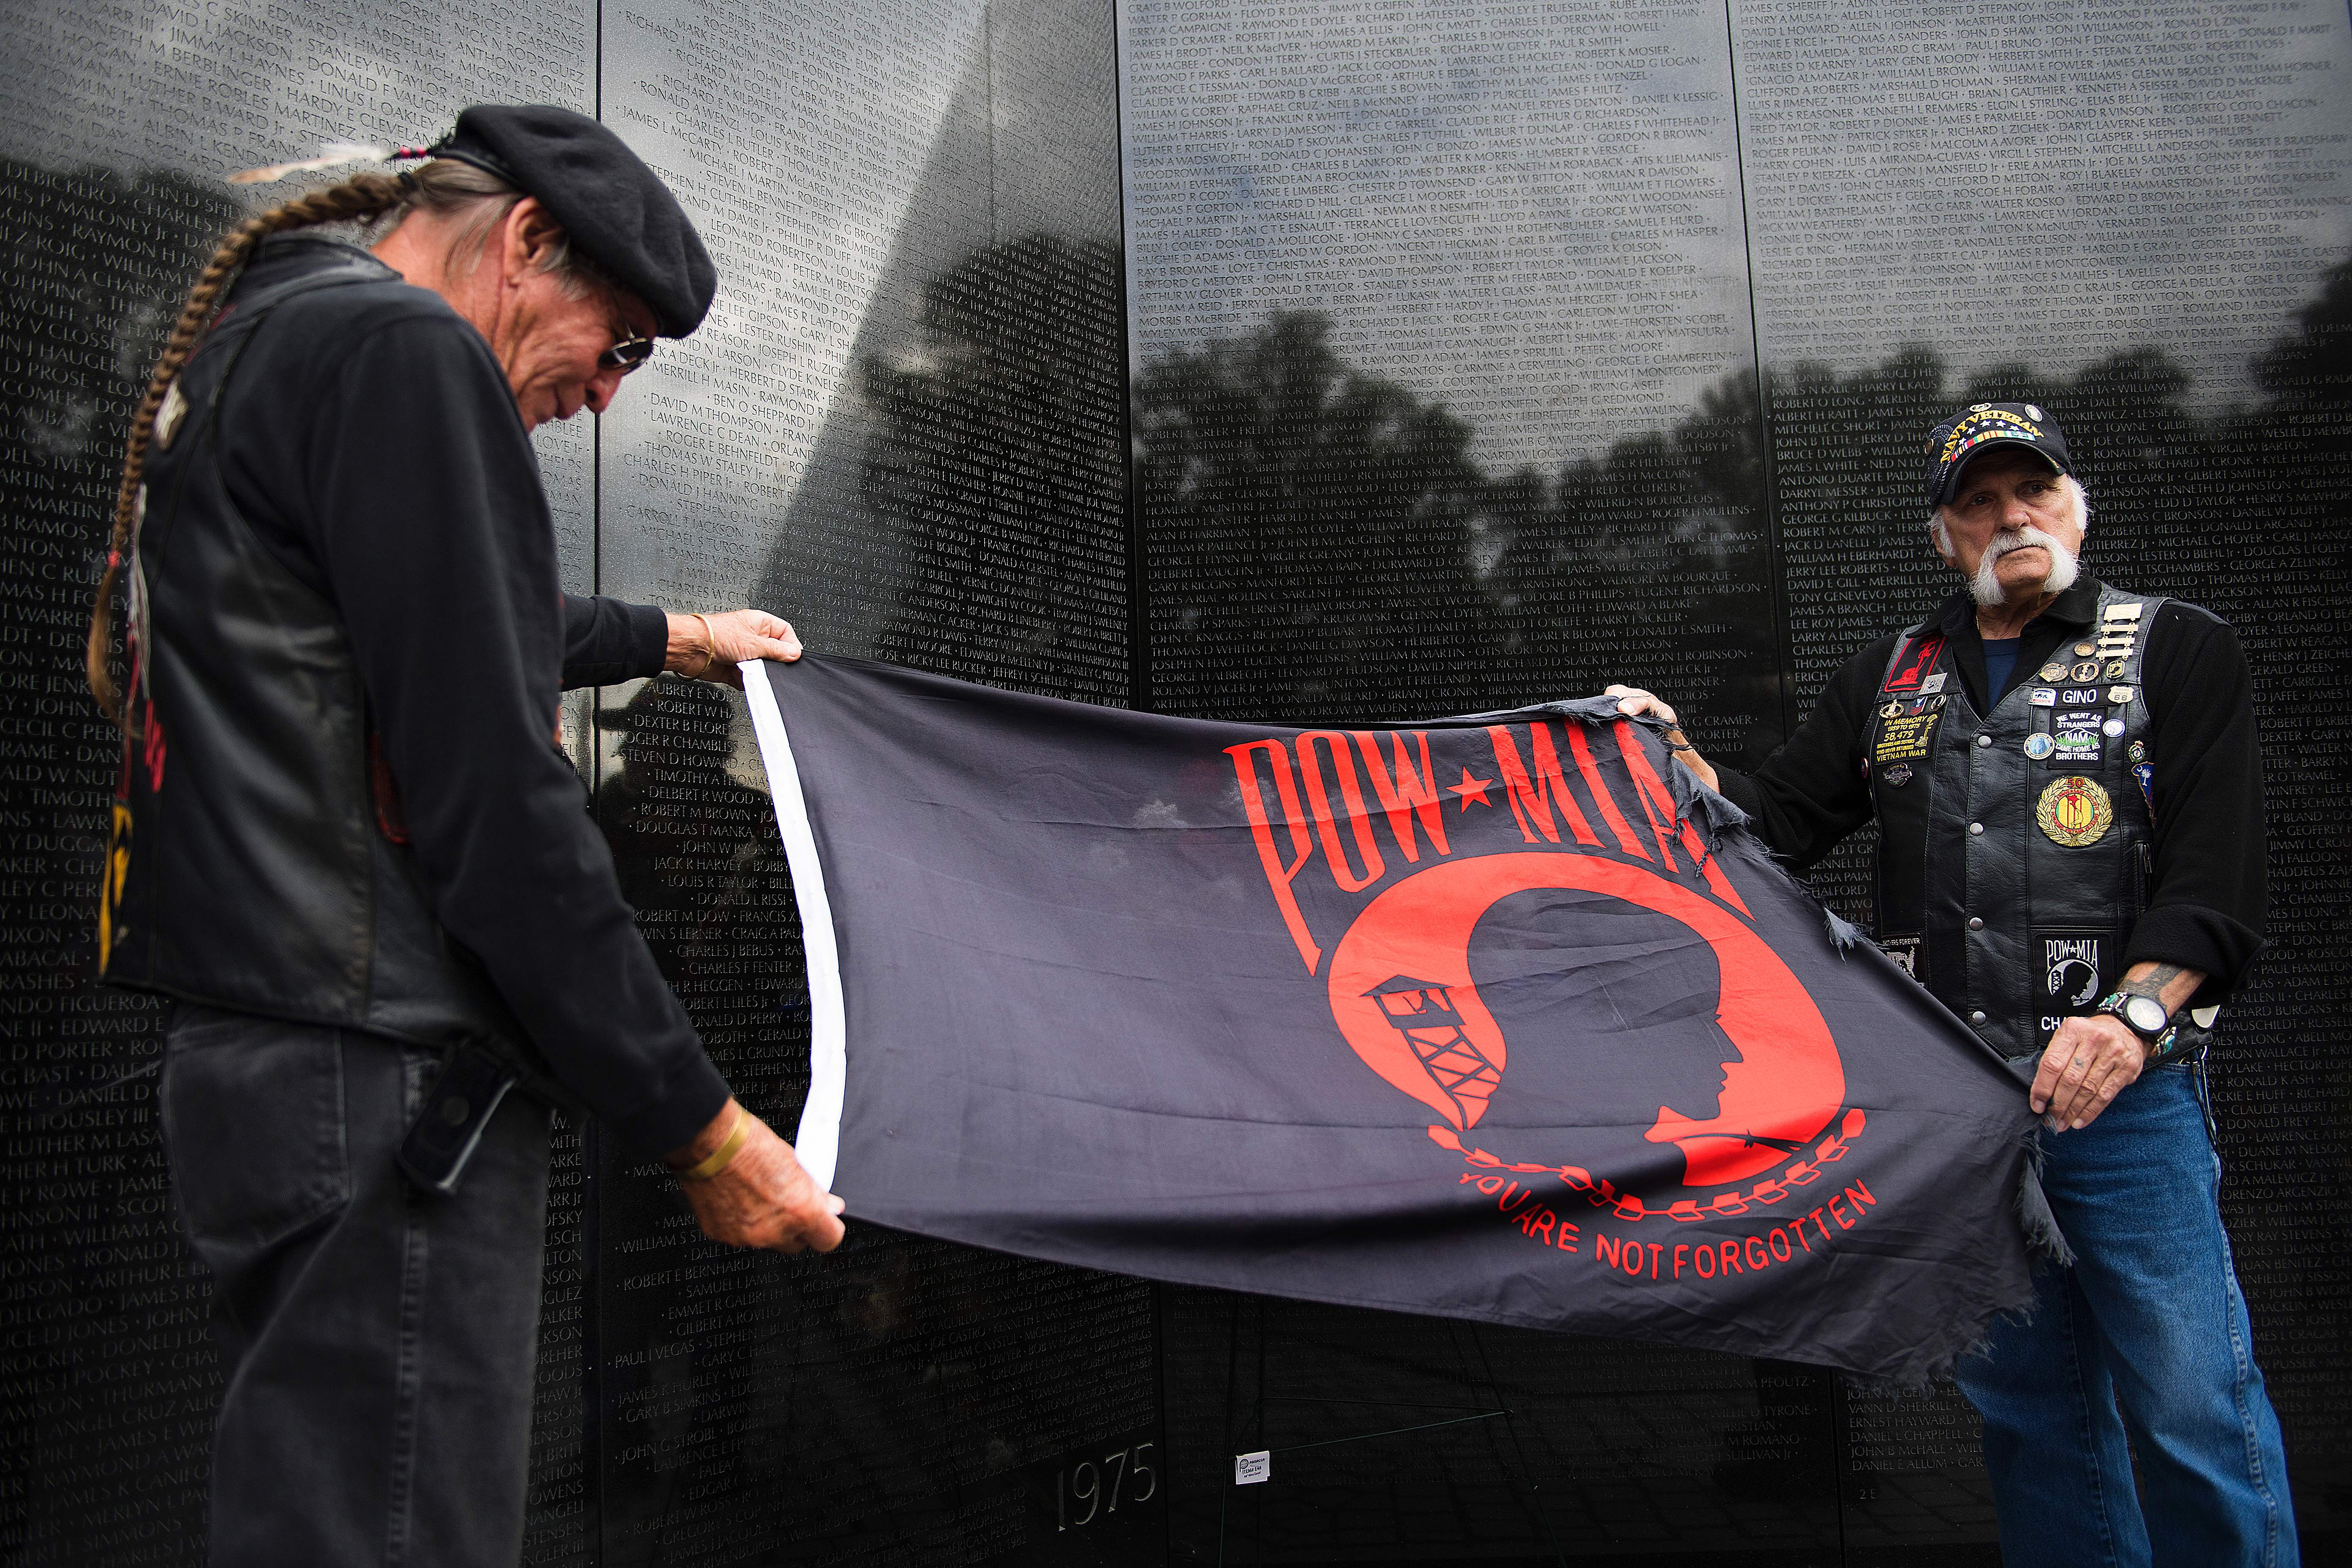 Vietnam veterans Michael Douglas and Gino Del Buono lay a prisoner of war - missing in action (POW - MIA) flag at the wall of Vietnam War Memorial. (Jim Watson/AFP/Getty Images)